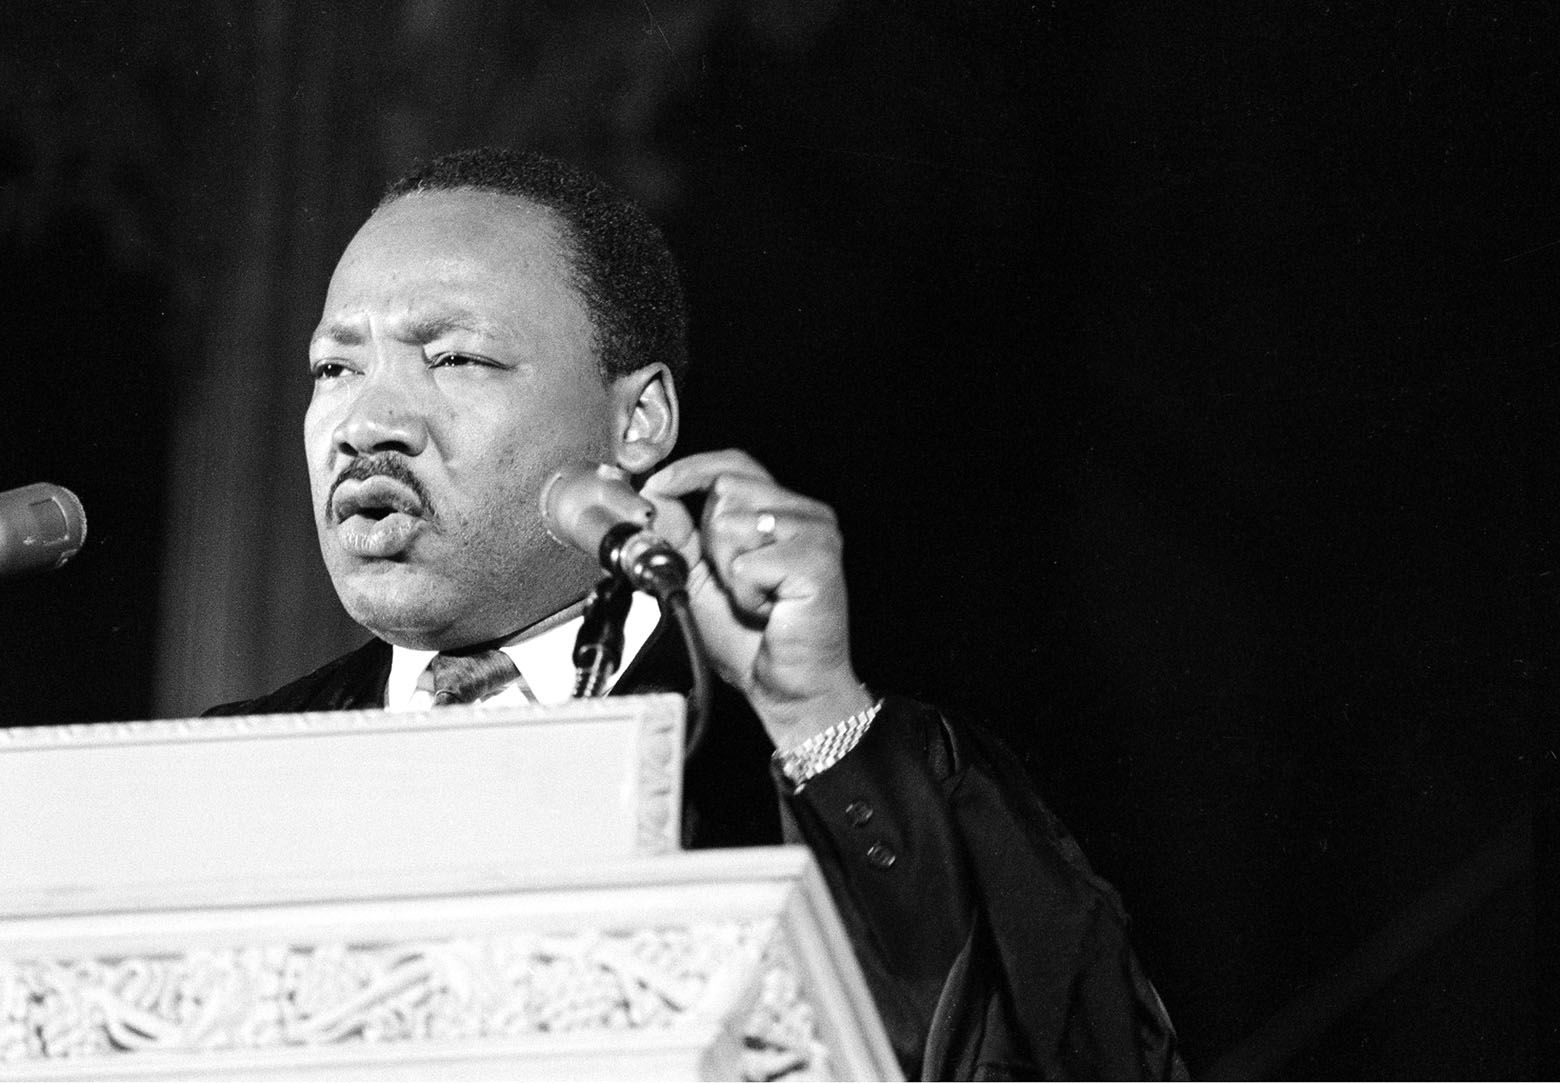 Dr. Martin Luther King Jr., discusses his planned poor people's demonstration from the pulpit of the Washington National Cathedral in Washington, D.C., March 31, 1968.  (AP Photo)